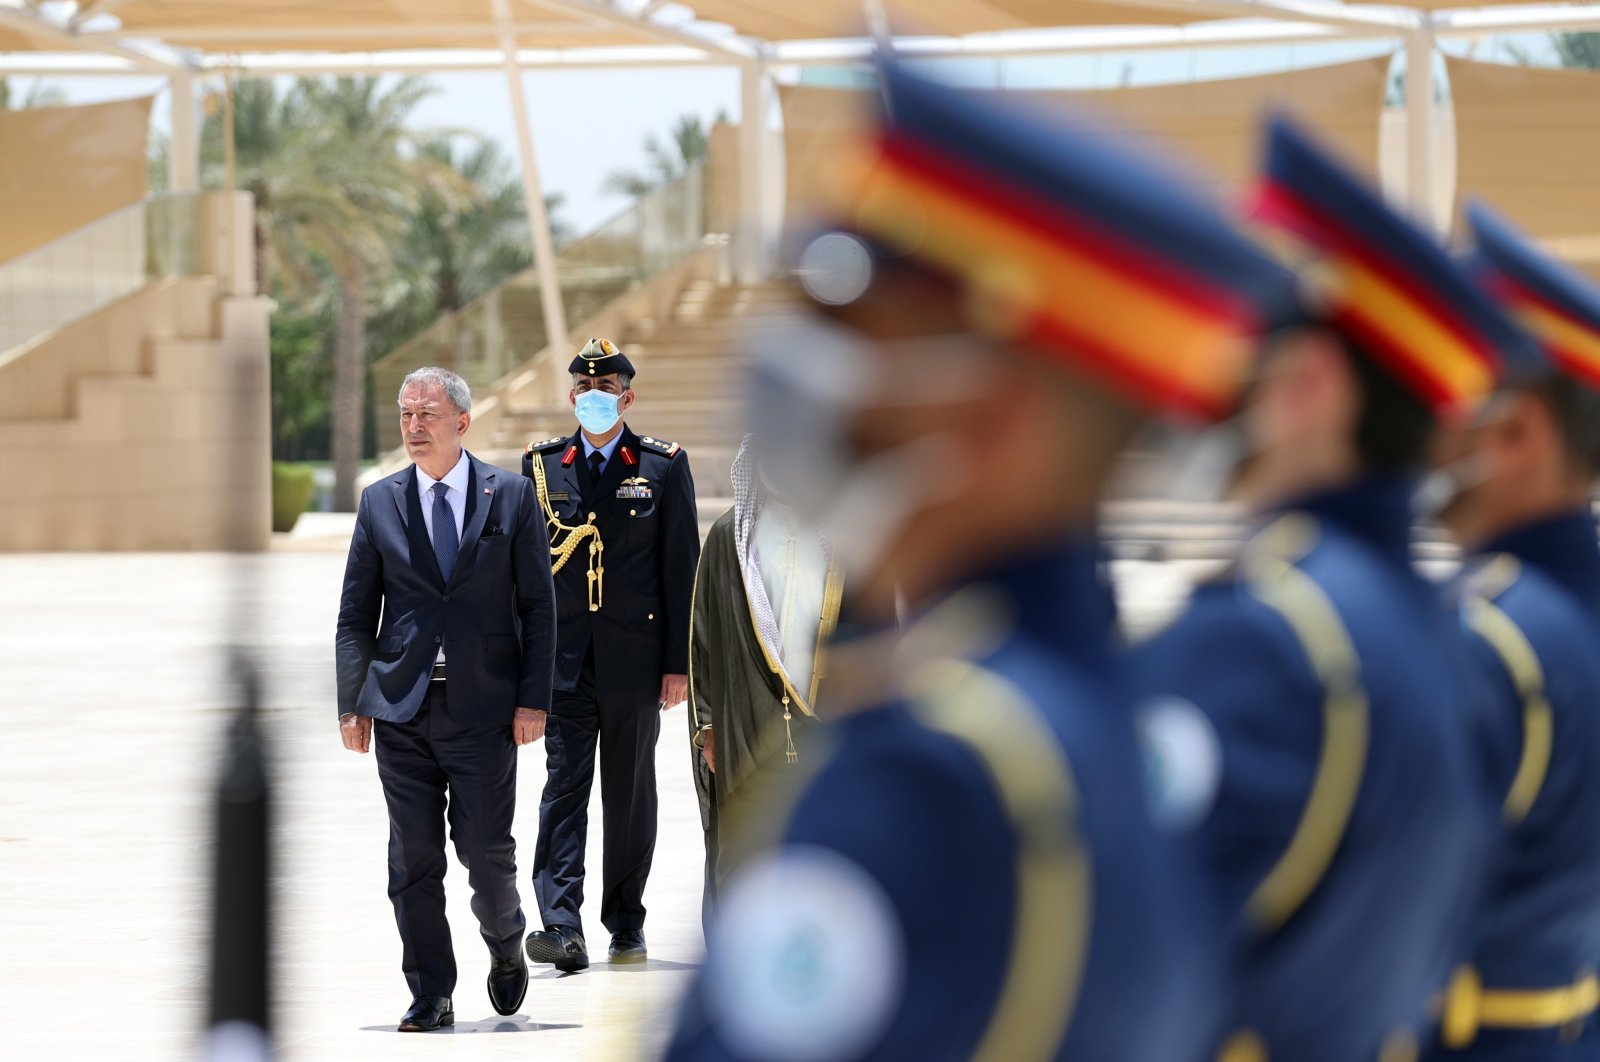 Defense Minister Hulusi Akar is welcomed by his UAE counterpart in a ceremony, May 30, 2022. (IHA Photo)